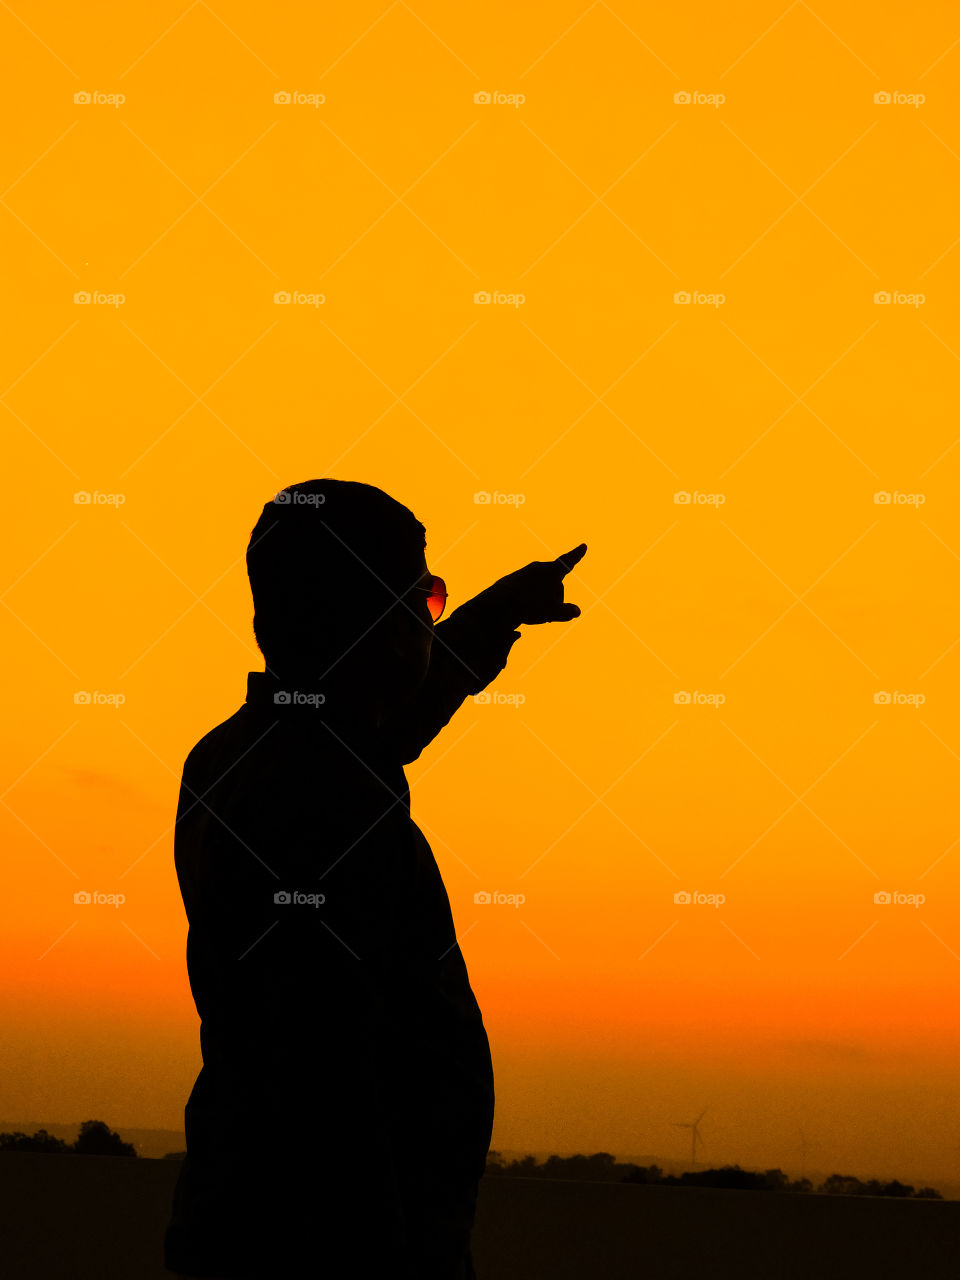 Silhouette image or wallpaper - In this photograph a man showing a past of this year.